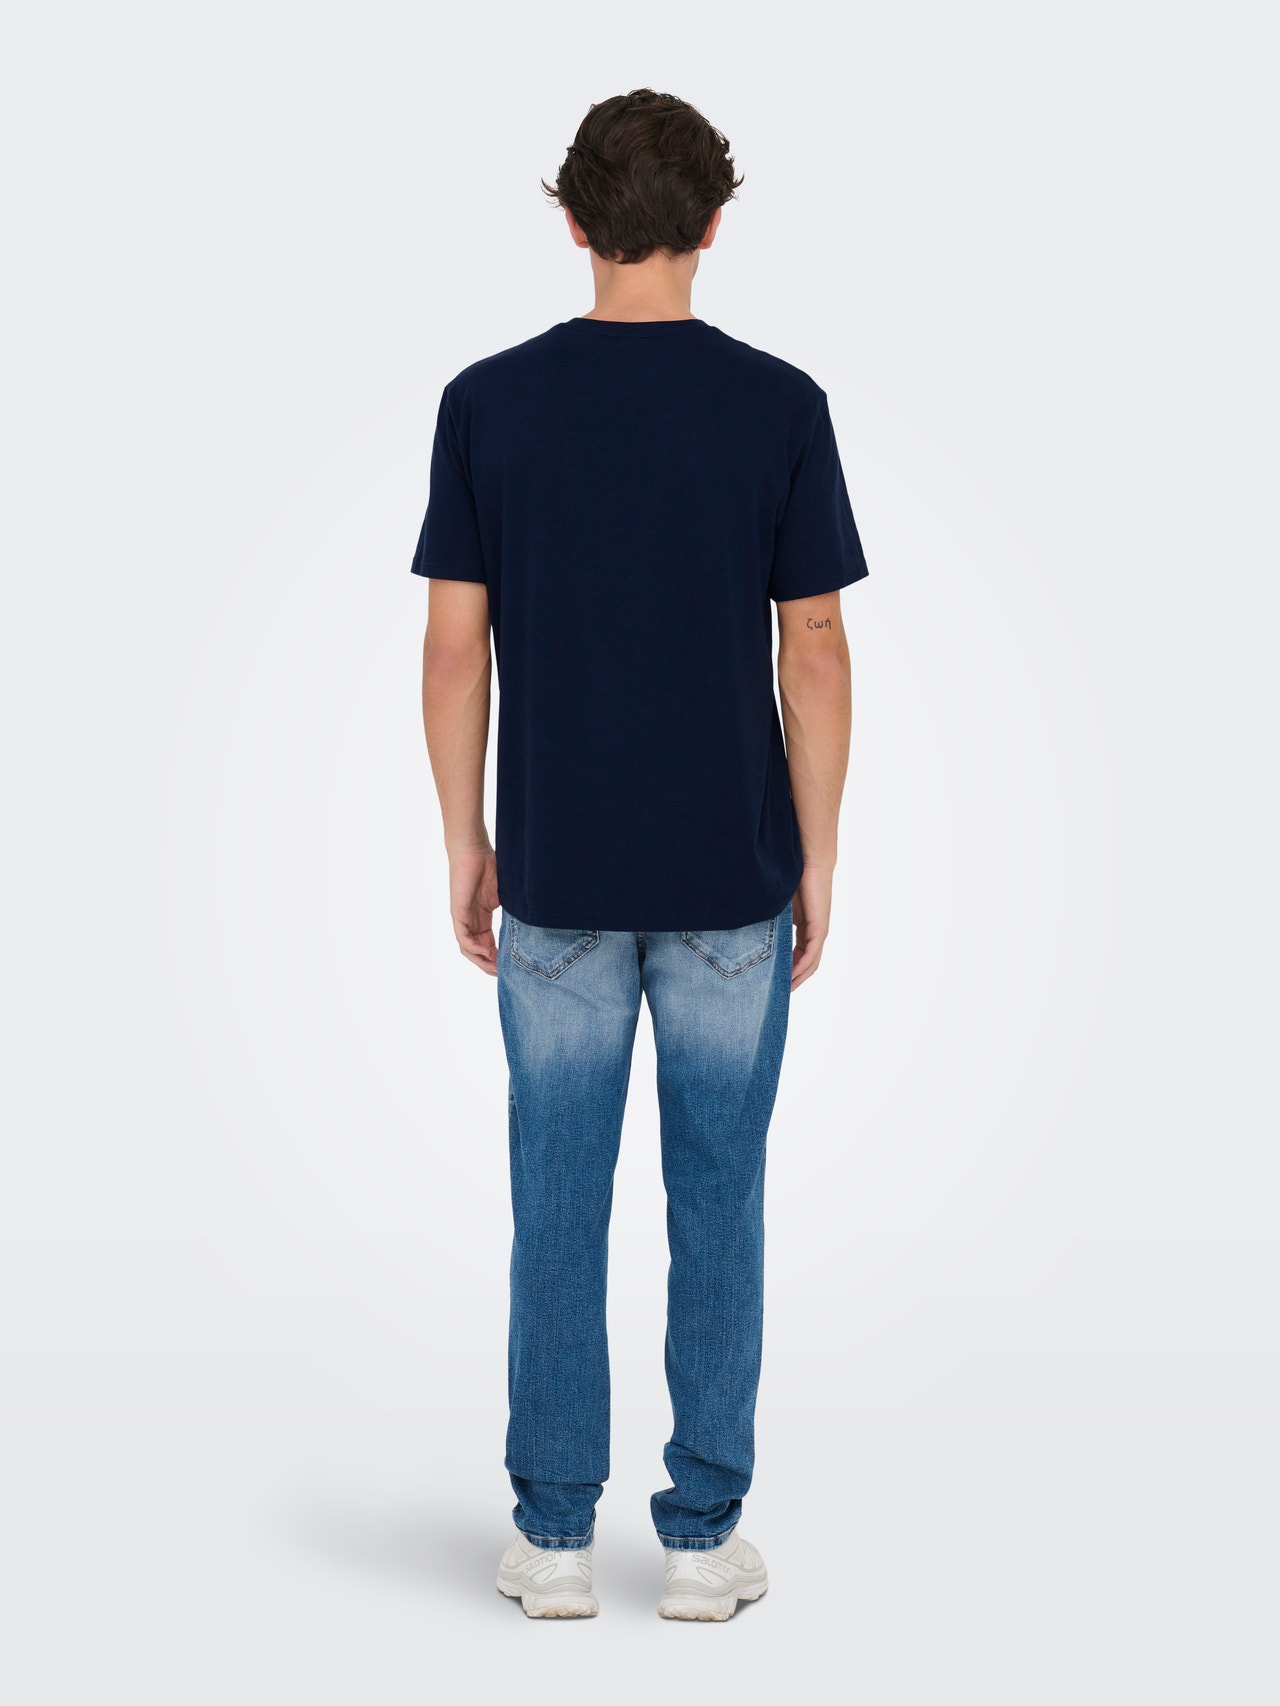 ONLY & SONS O-neck t-shirt with print -Navy Blazer - 22028593